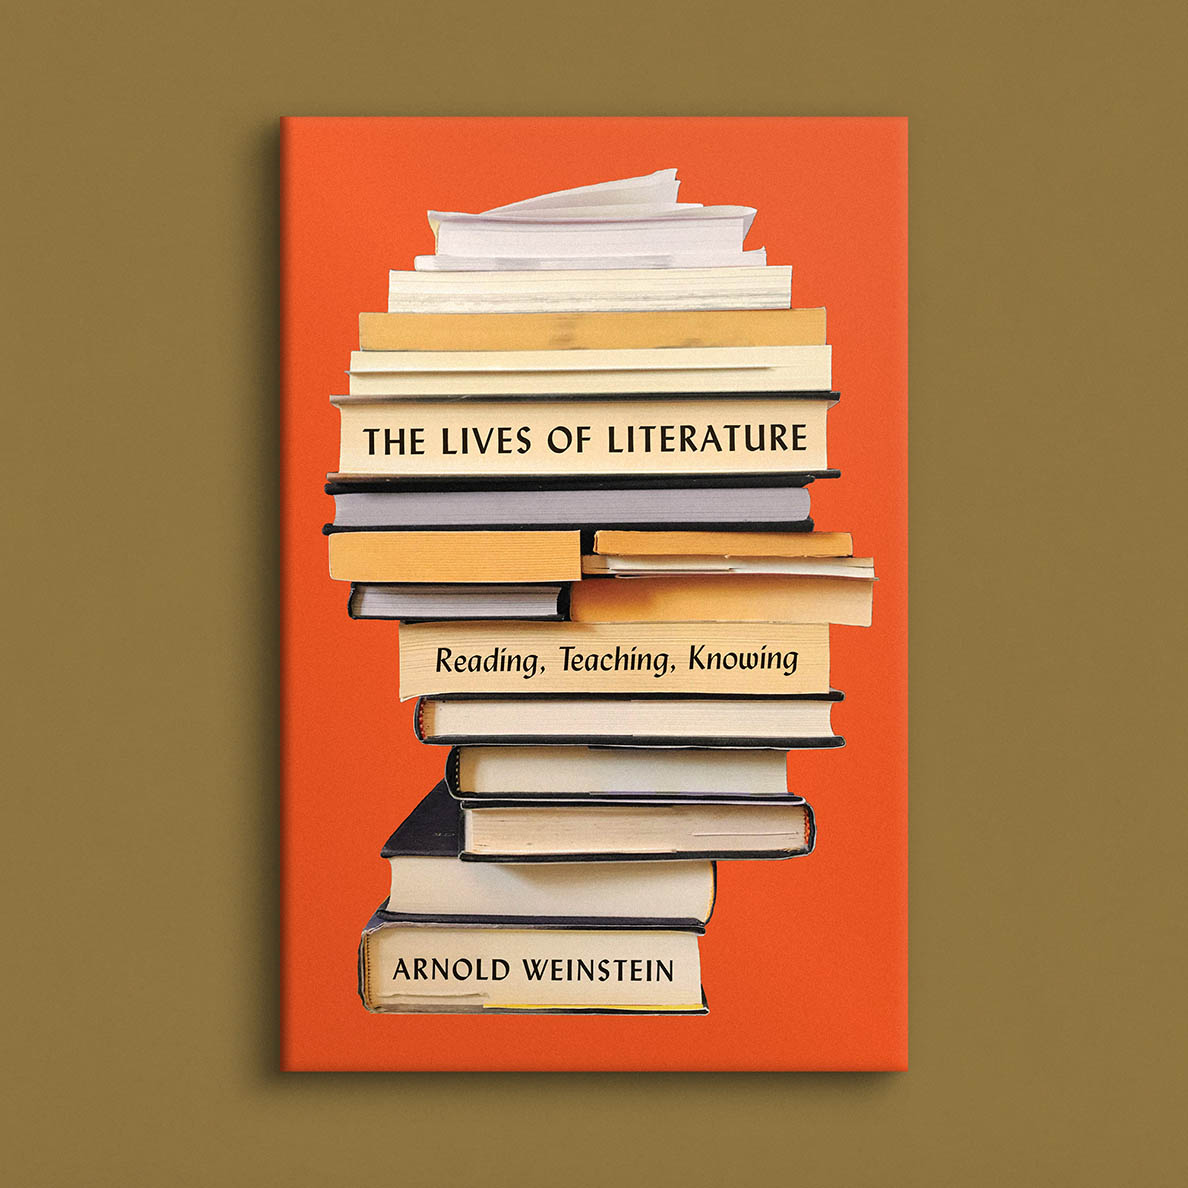 The Lives of Literature book cover